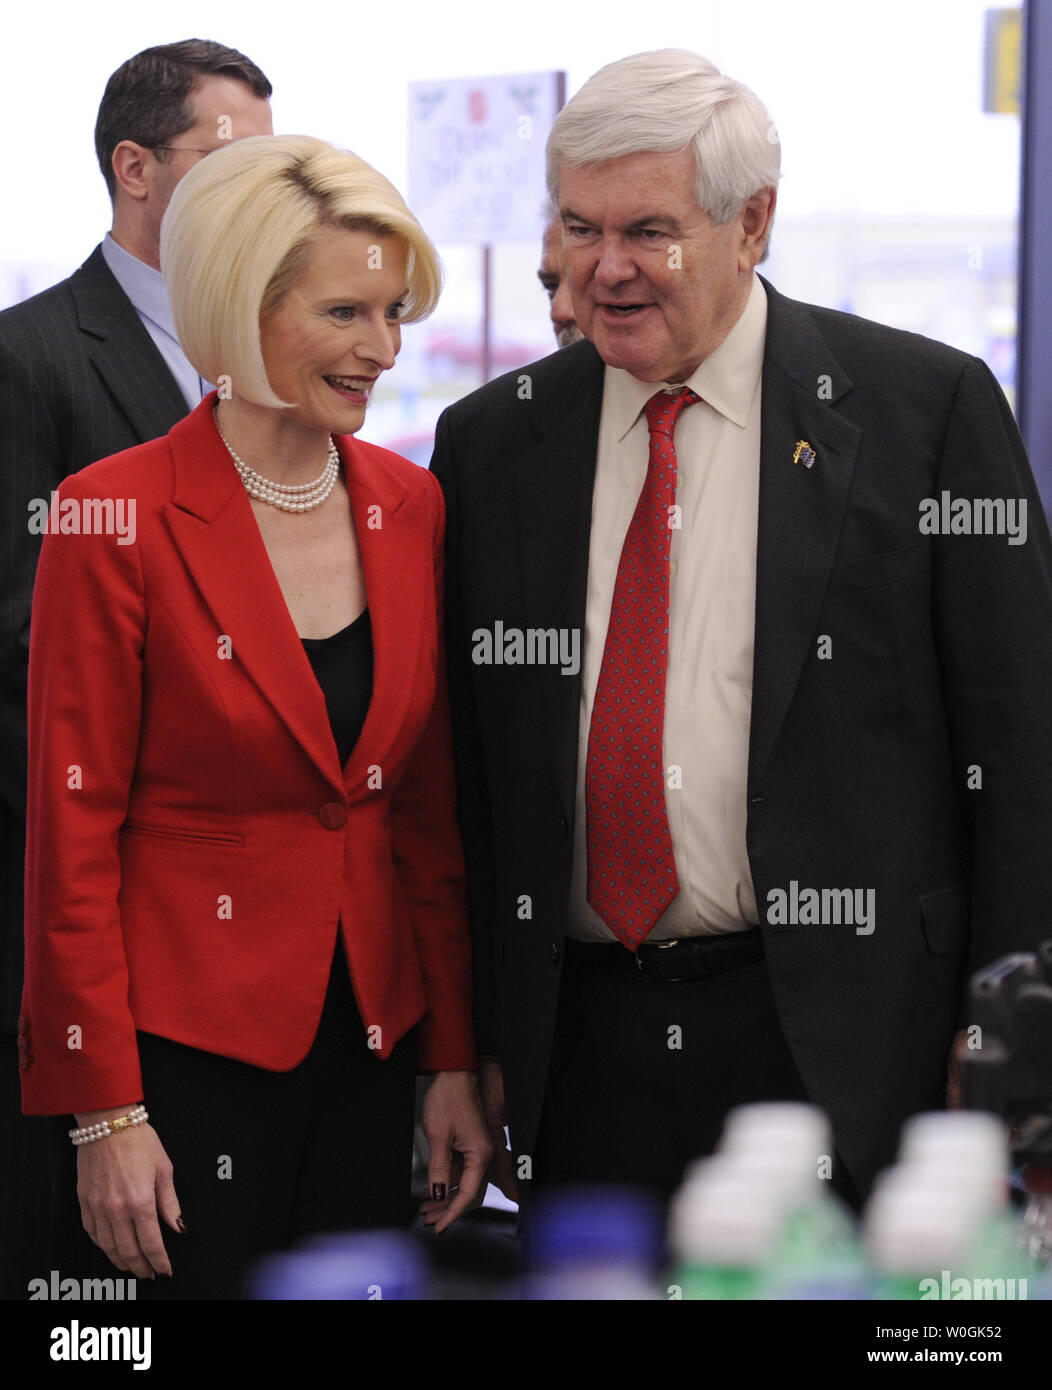 Republican 2012 presidential candidate and former US House Speaker Newt Gingrich and his wife Callista arrive for a meet-and-greet at a Hy-Vee grocery store, in Mt. Pleasant, Iowa, December 20, 2011, in advance of Iowa's first-in-the-nation caucuses, January 3,2012.    UPI/Mike Theiler Stock Photo